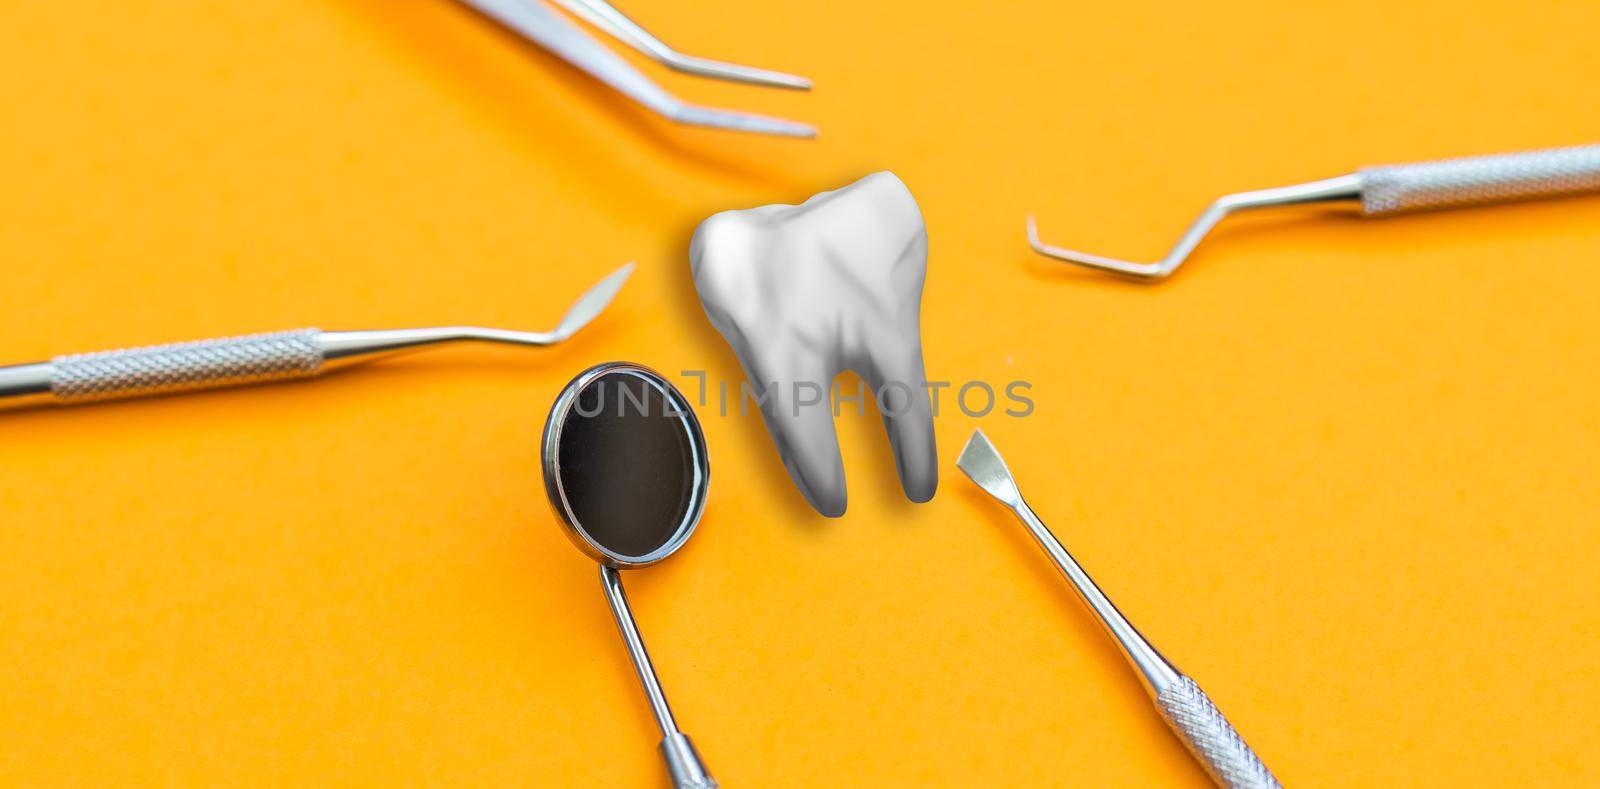 Artificial tooth and dental instrument on table. Dental services concept.